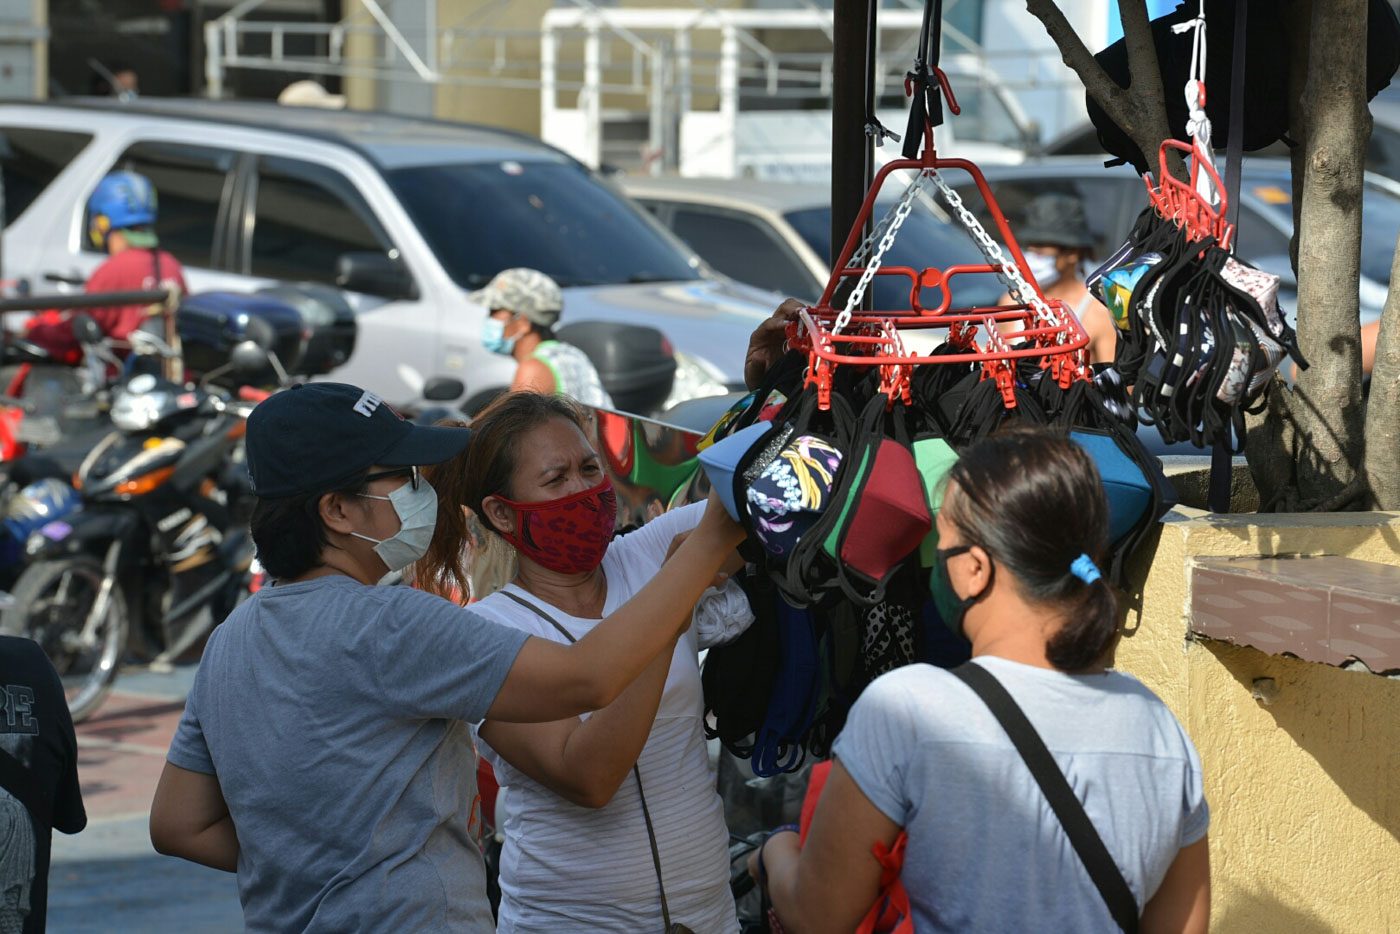 DE RIGUEUR. In the Noveleta Public Market in Cavitte, Saturday, May 16, 2020 people are buying the must-wear face mask. Photo by Dennis Abrina/Rappler 